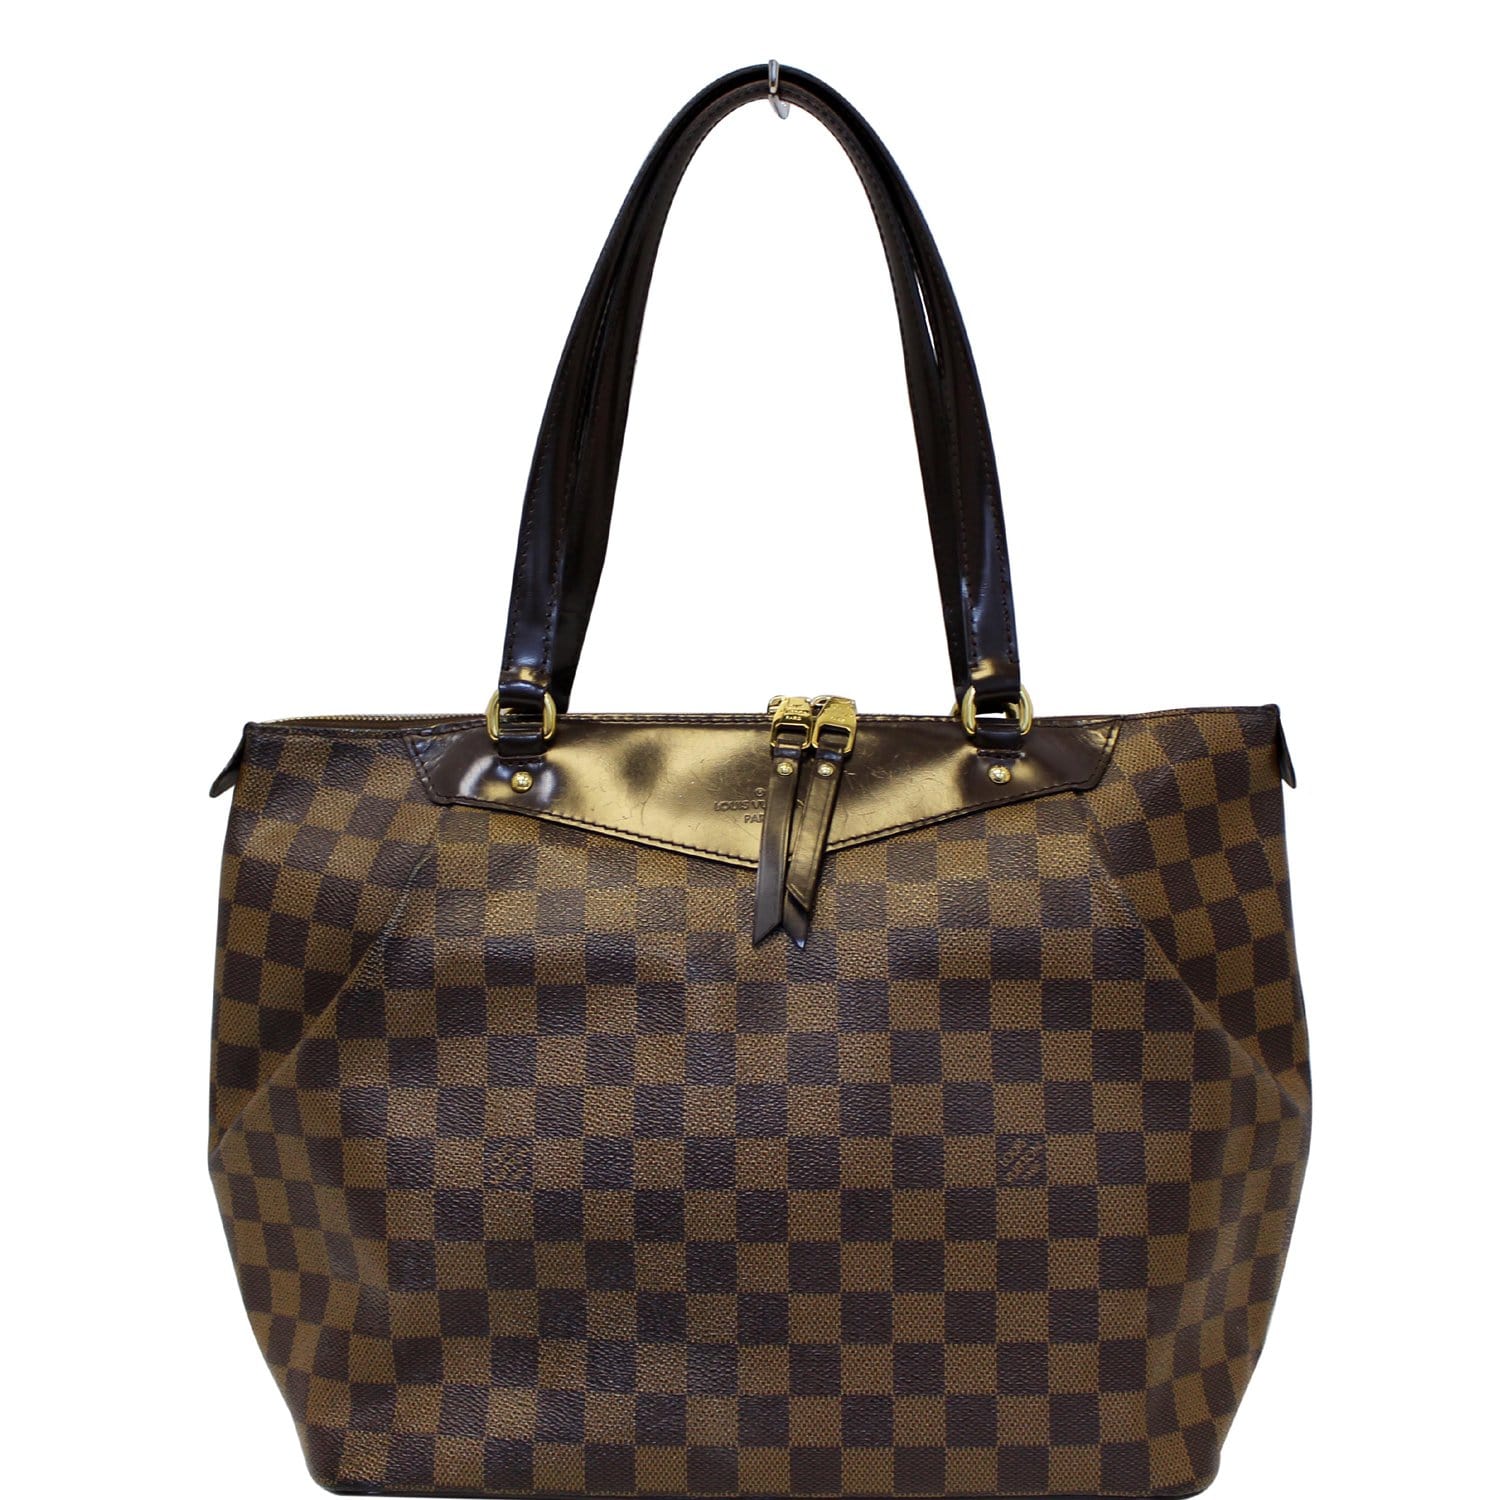 In LVoe with Louis Vuitton: Louis Vuitton Westminster in Damier Ebene